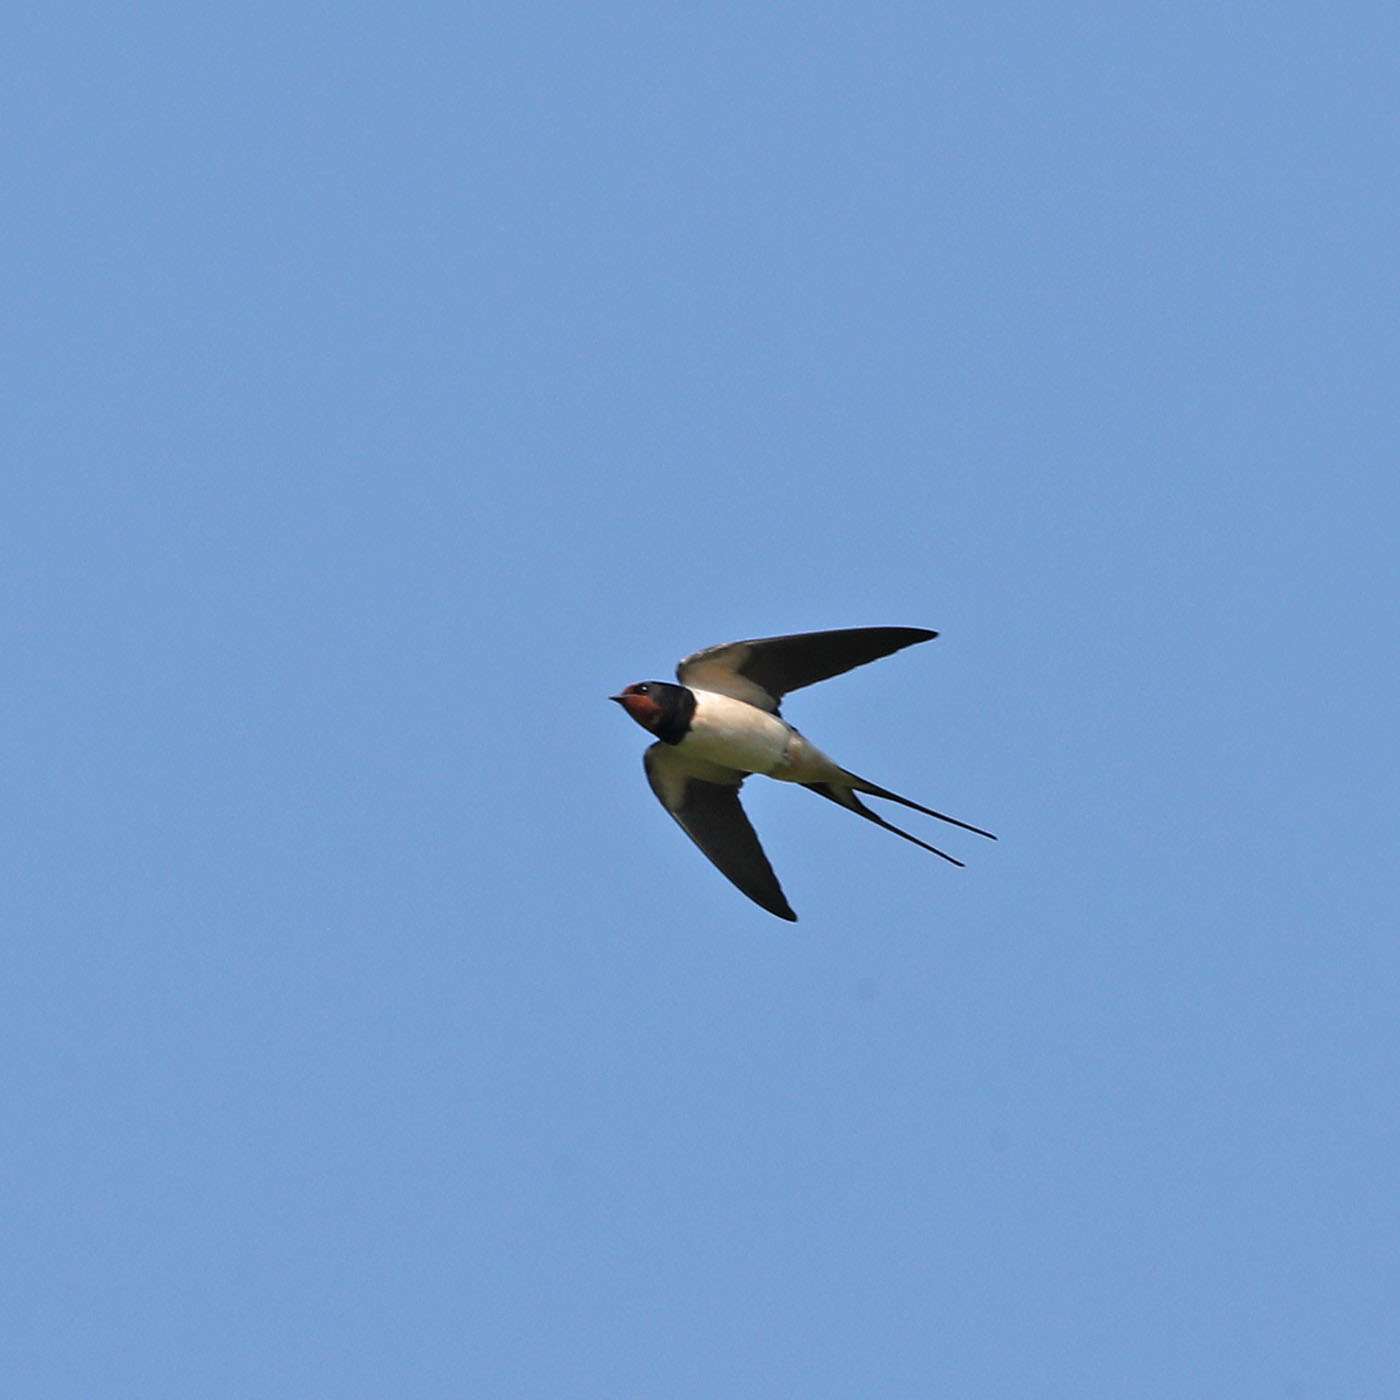 Swallow by Steve Hopper at South Brent